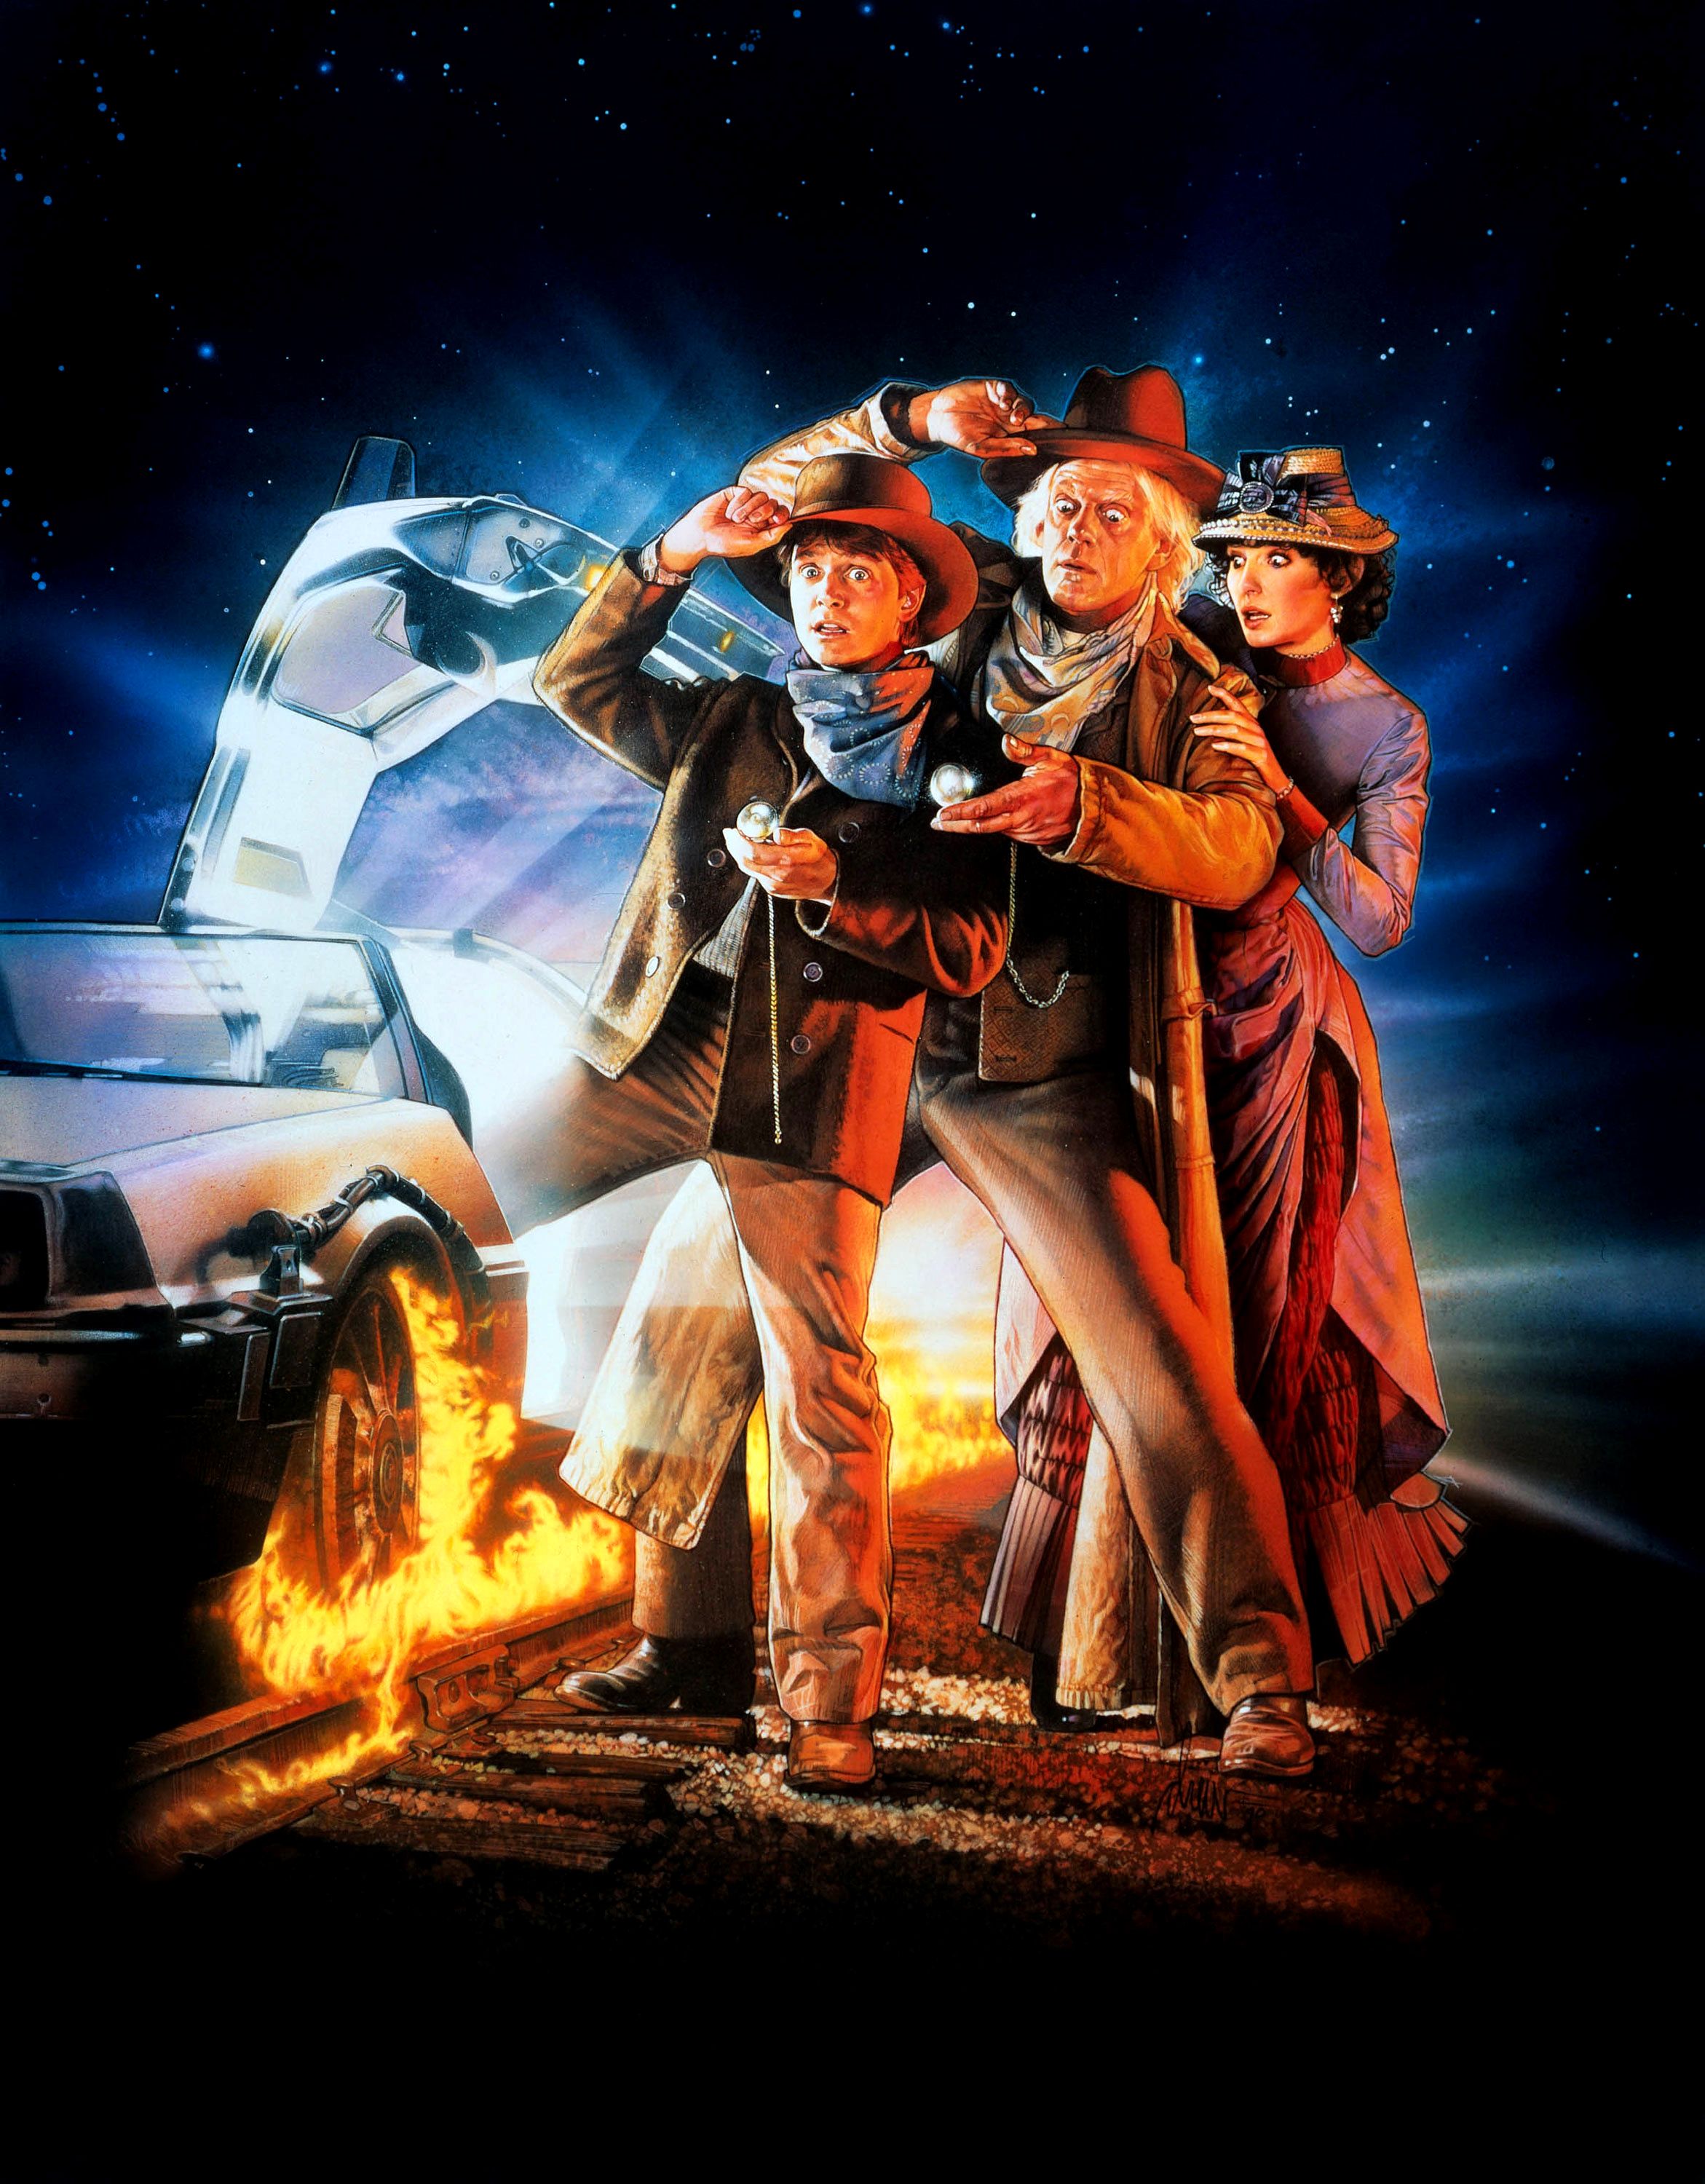 Back To The Future Part III wallpaper, Movie, HQ Back To The Future Part III pictureK Wallpaper 2019